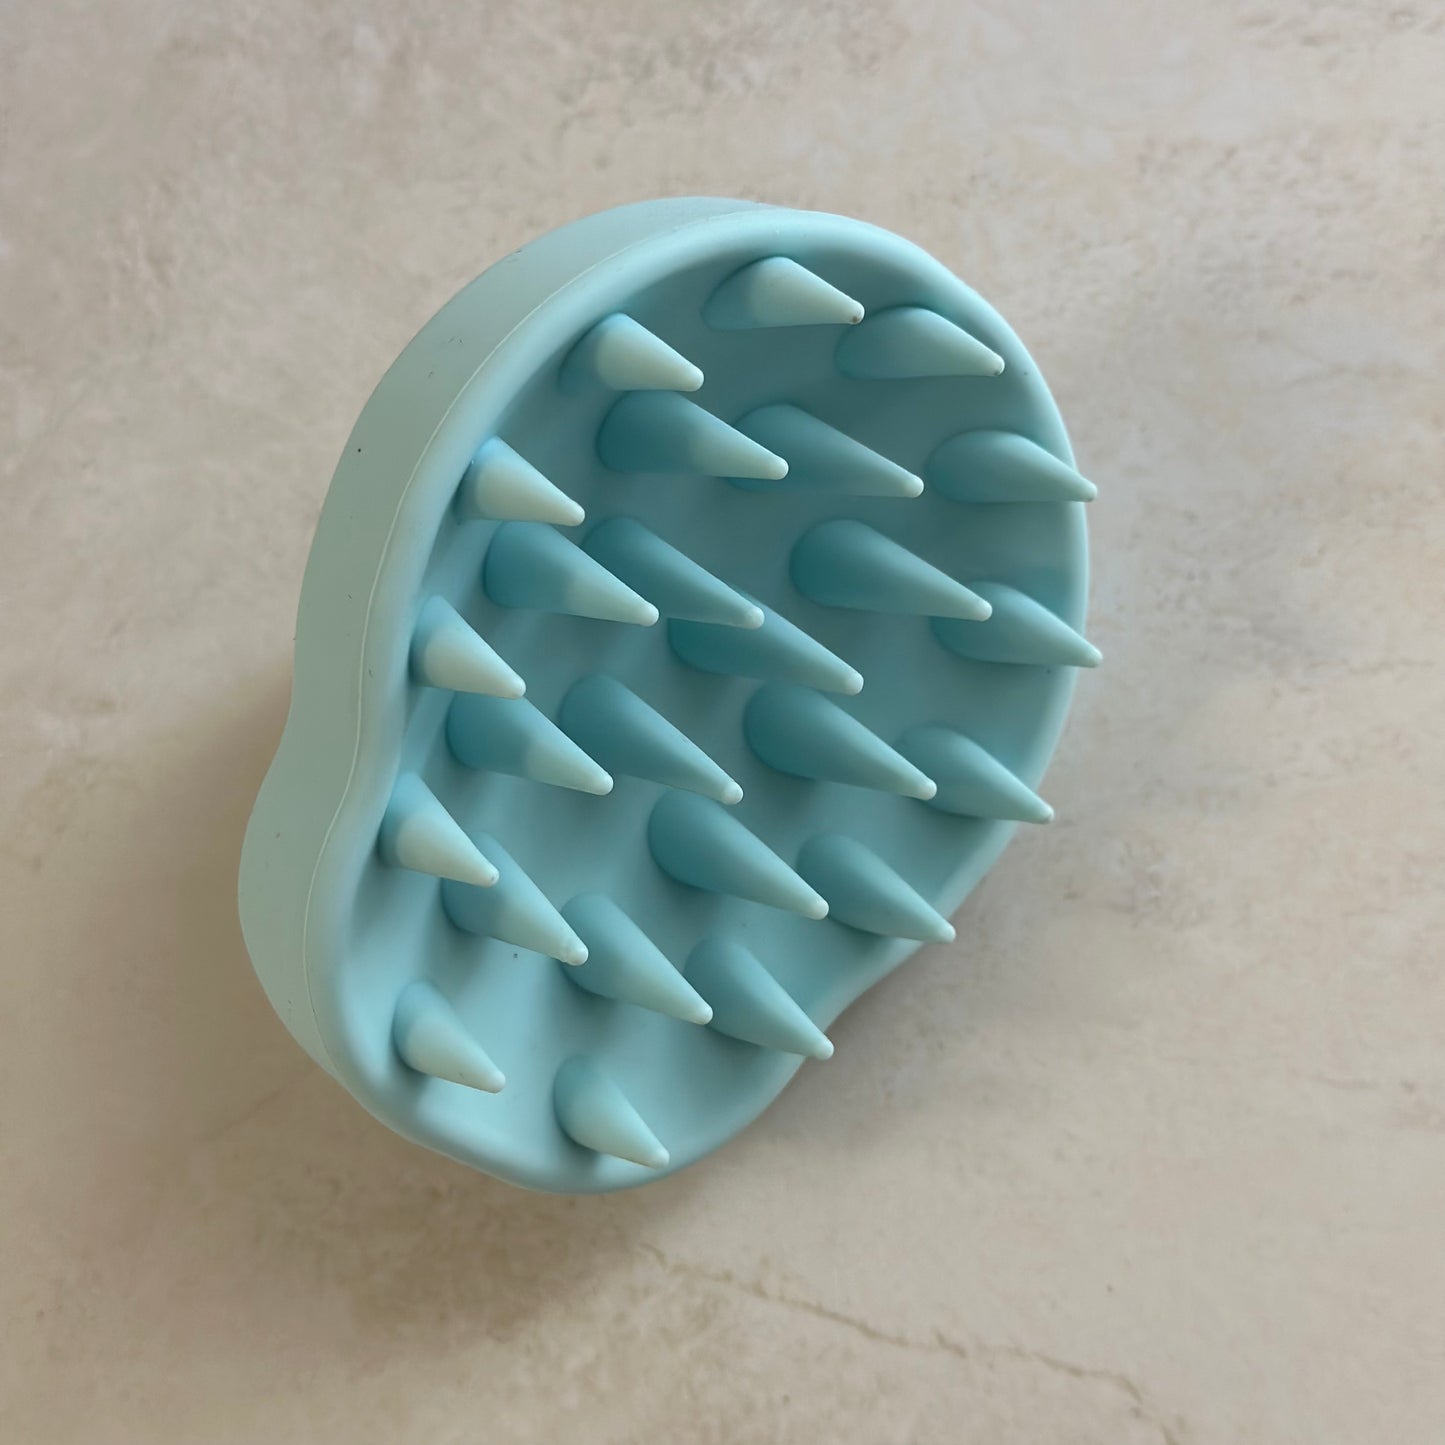 Silicone Hair and Scalp Scrubbers - Massage, clean, stimulate circulation